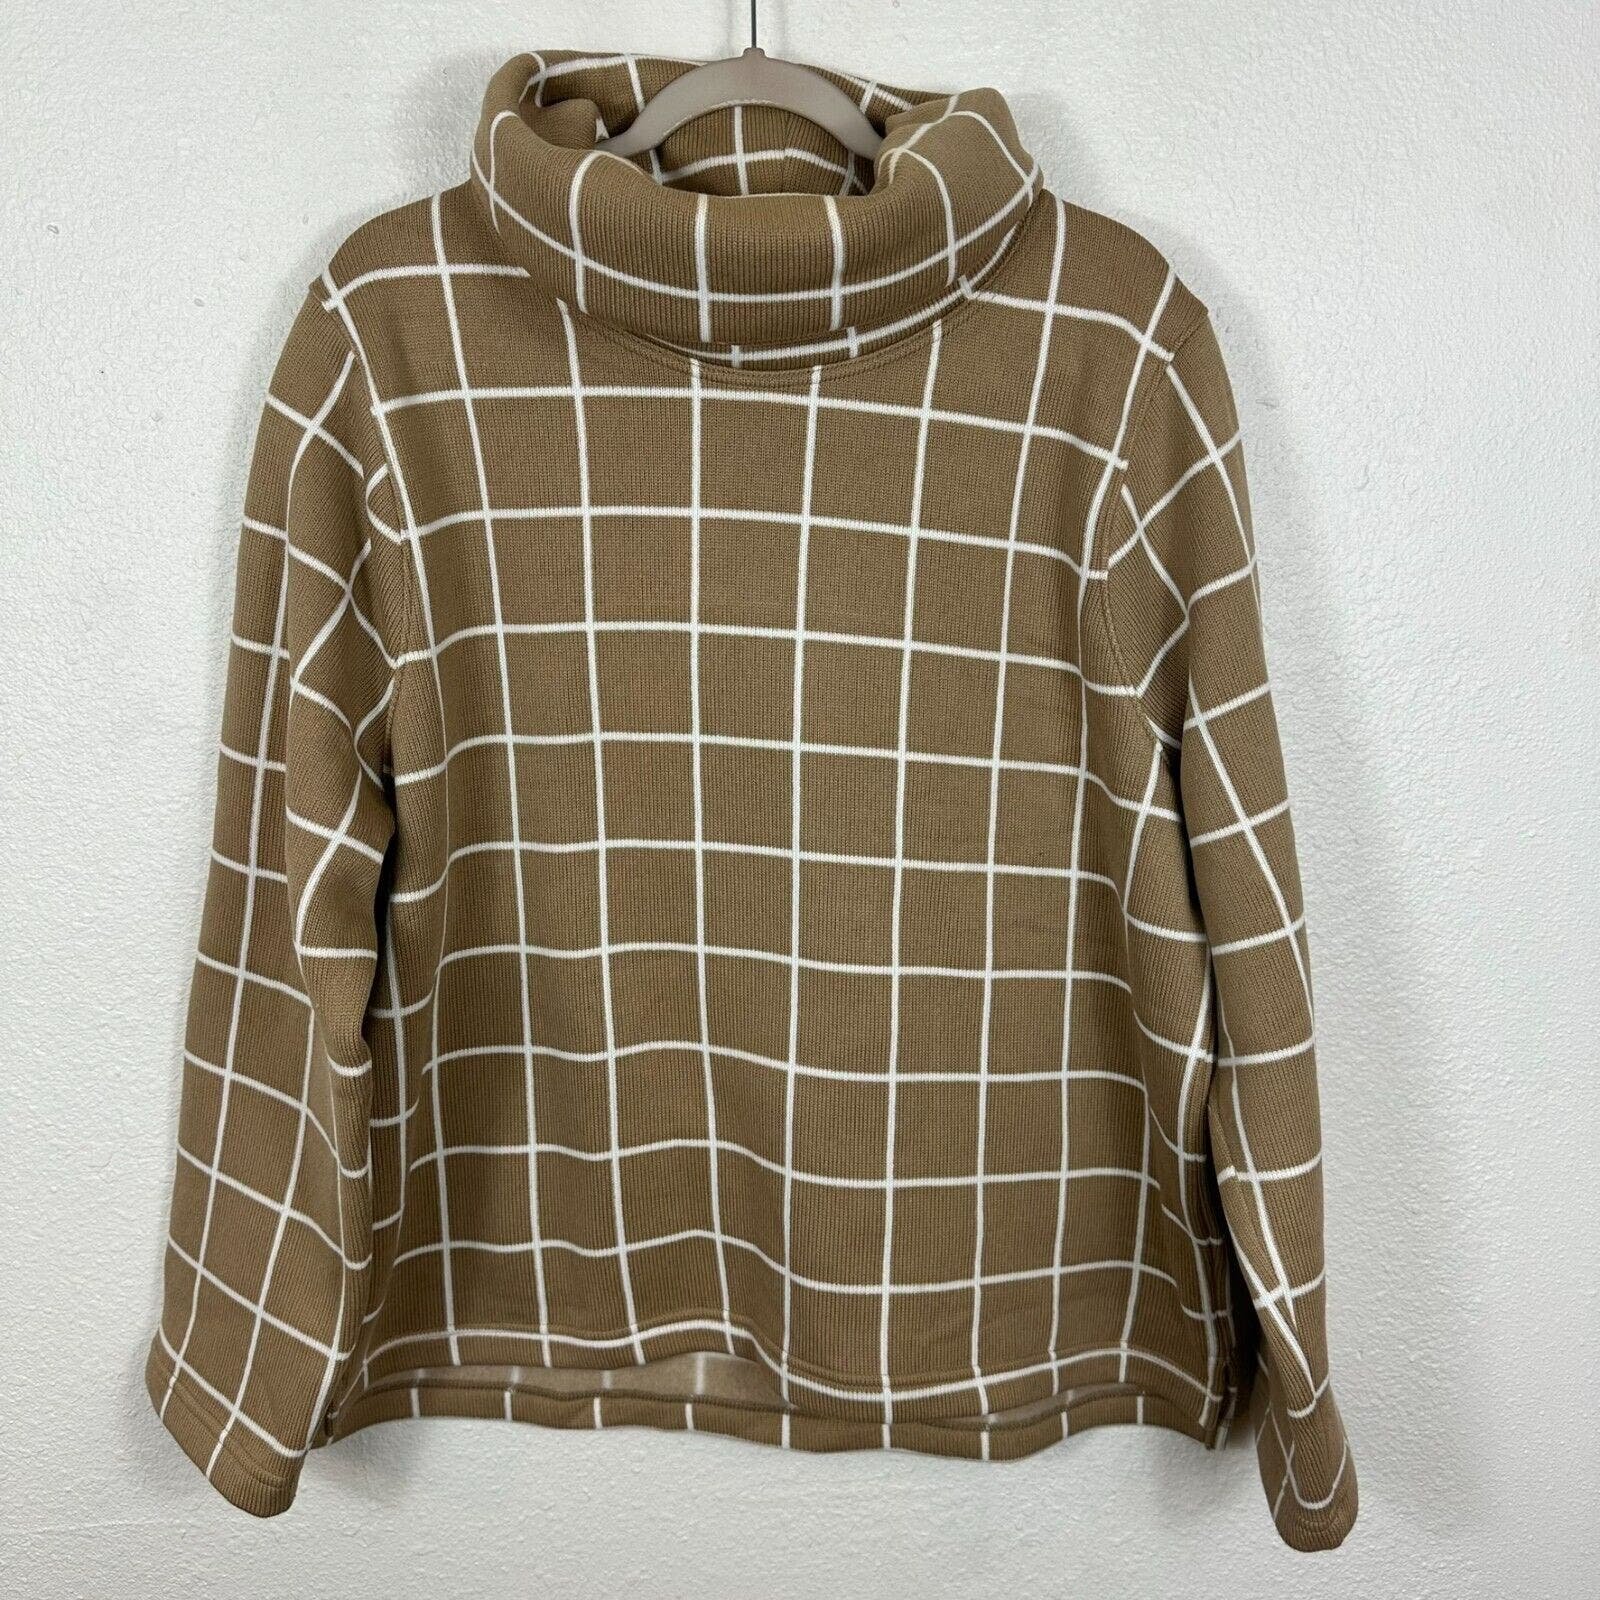 large selection J Crew Funnel Neck Sweater Camel Brown Plaid Womens 2X Cozy Cottagecore kNyCTBgGd well sale